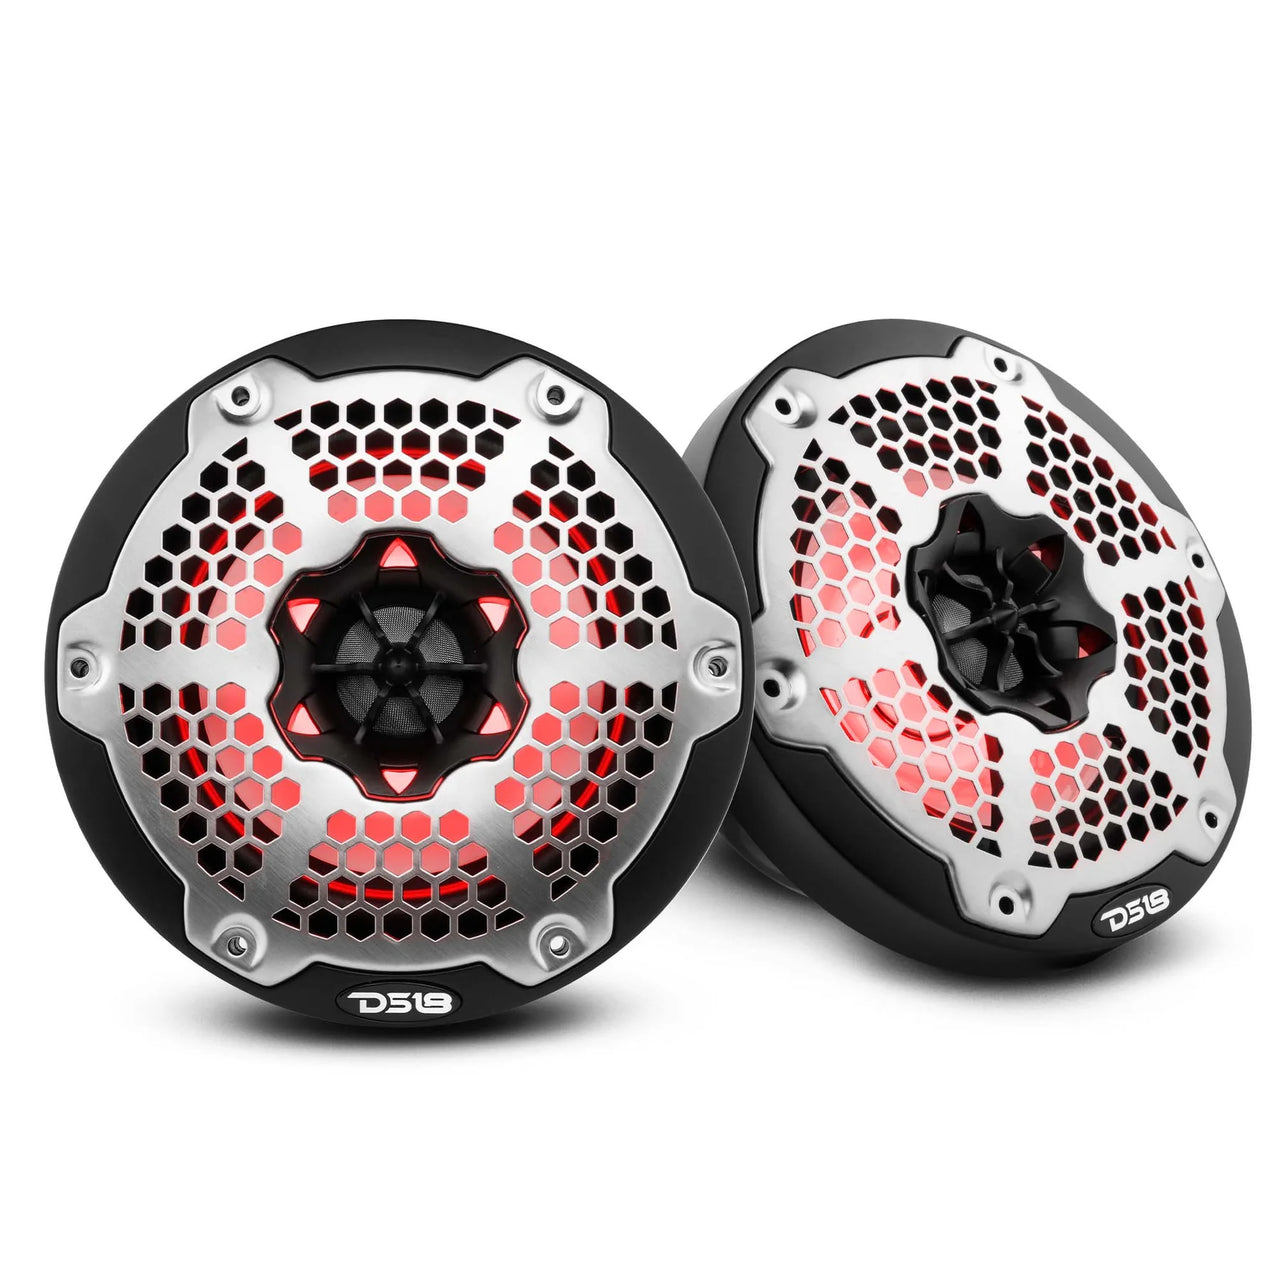 DS18 New Edition 6.5" 2-Way Marine Speakers With RGB LED Lights